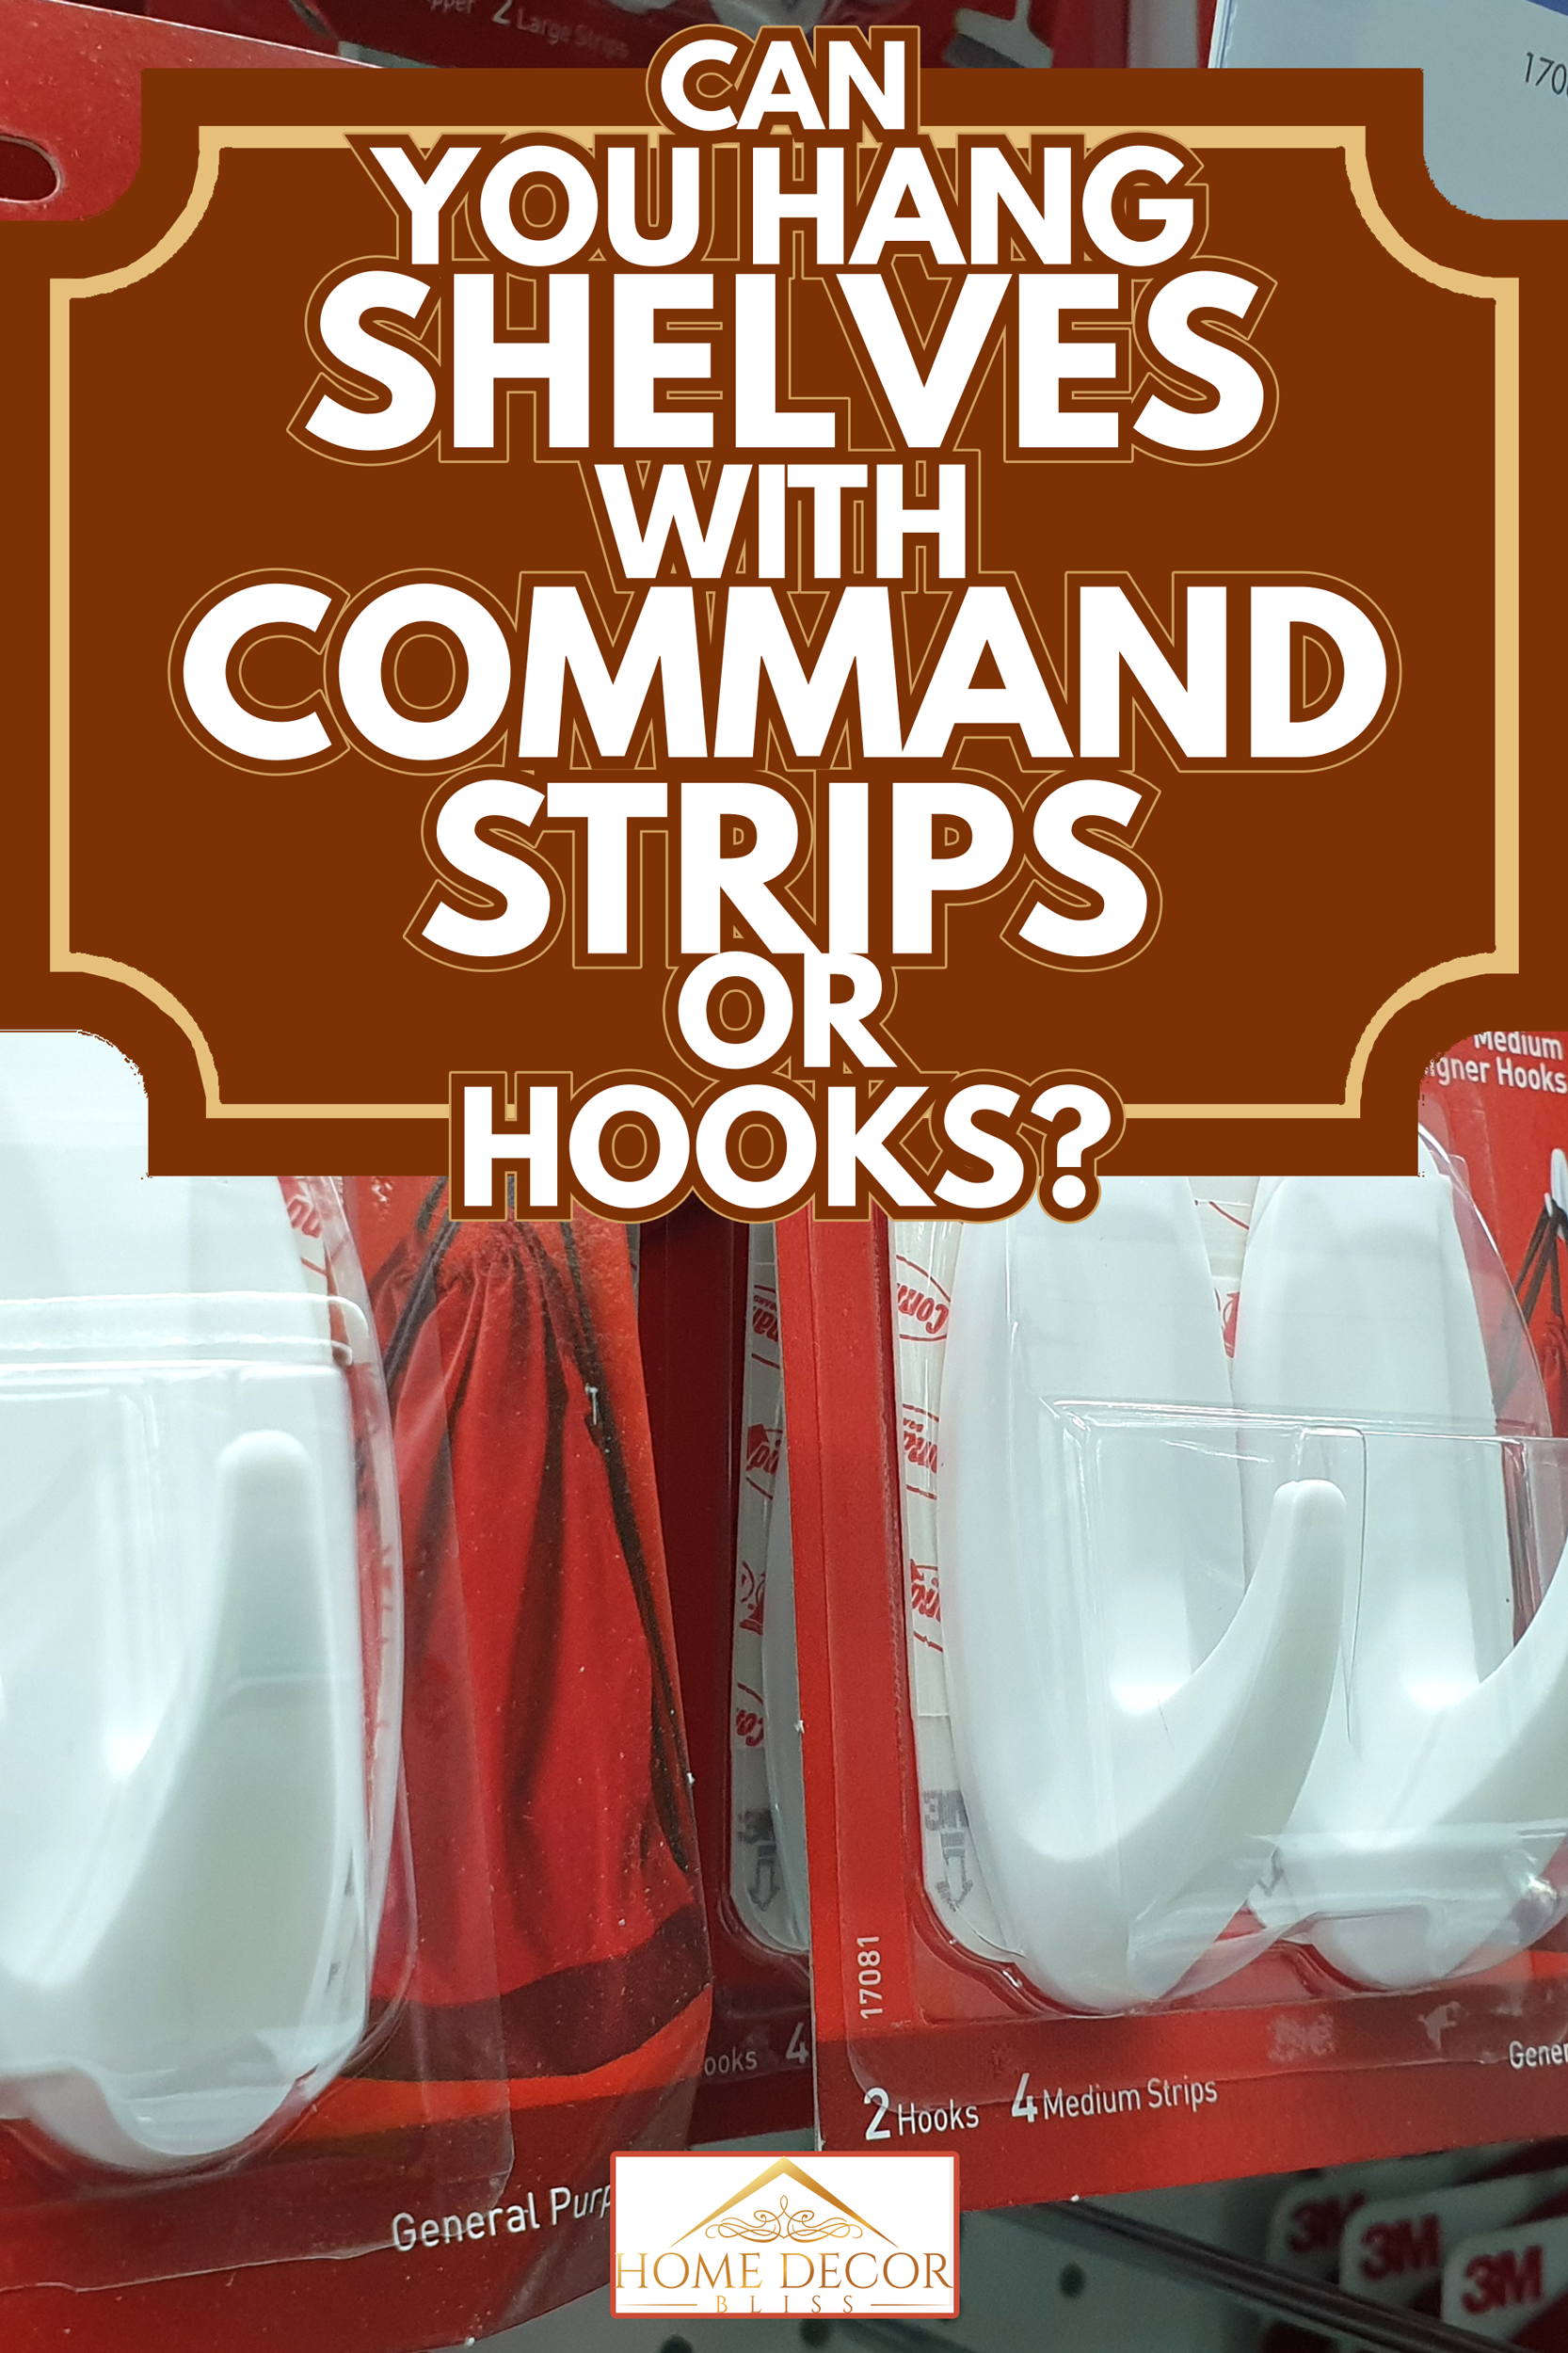 ommand brand Picture Hanging Strips and Hooks by 3M company on store shelf - Can You Hang Shelves With Command Strips Or Hooks